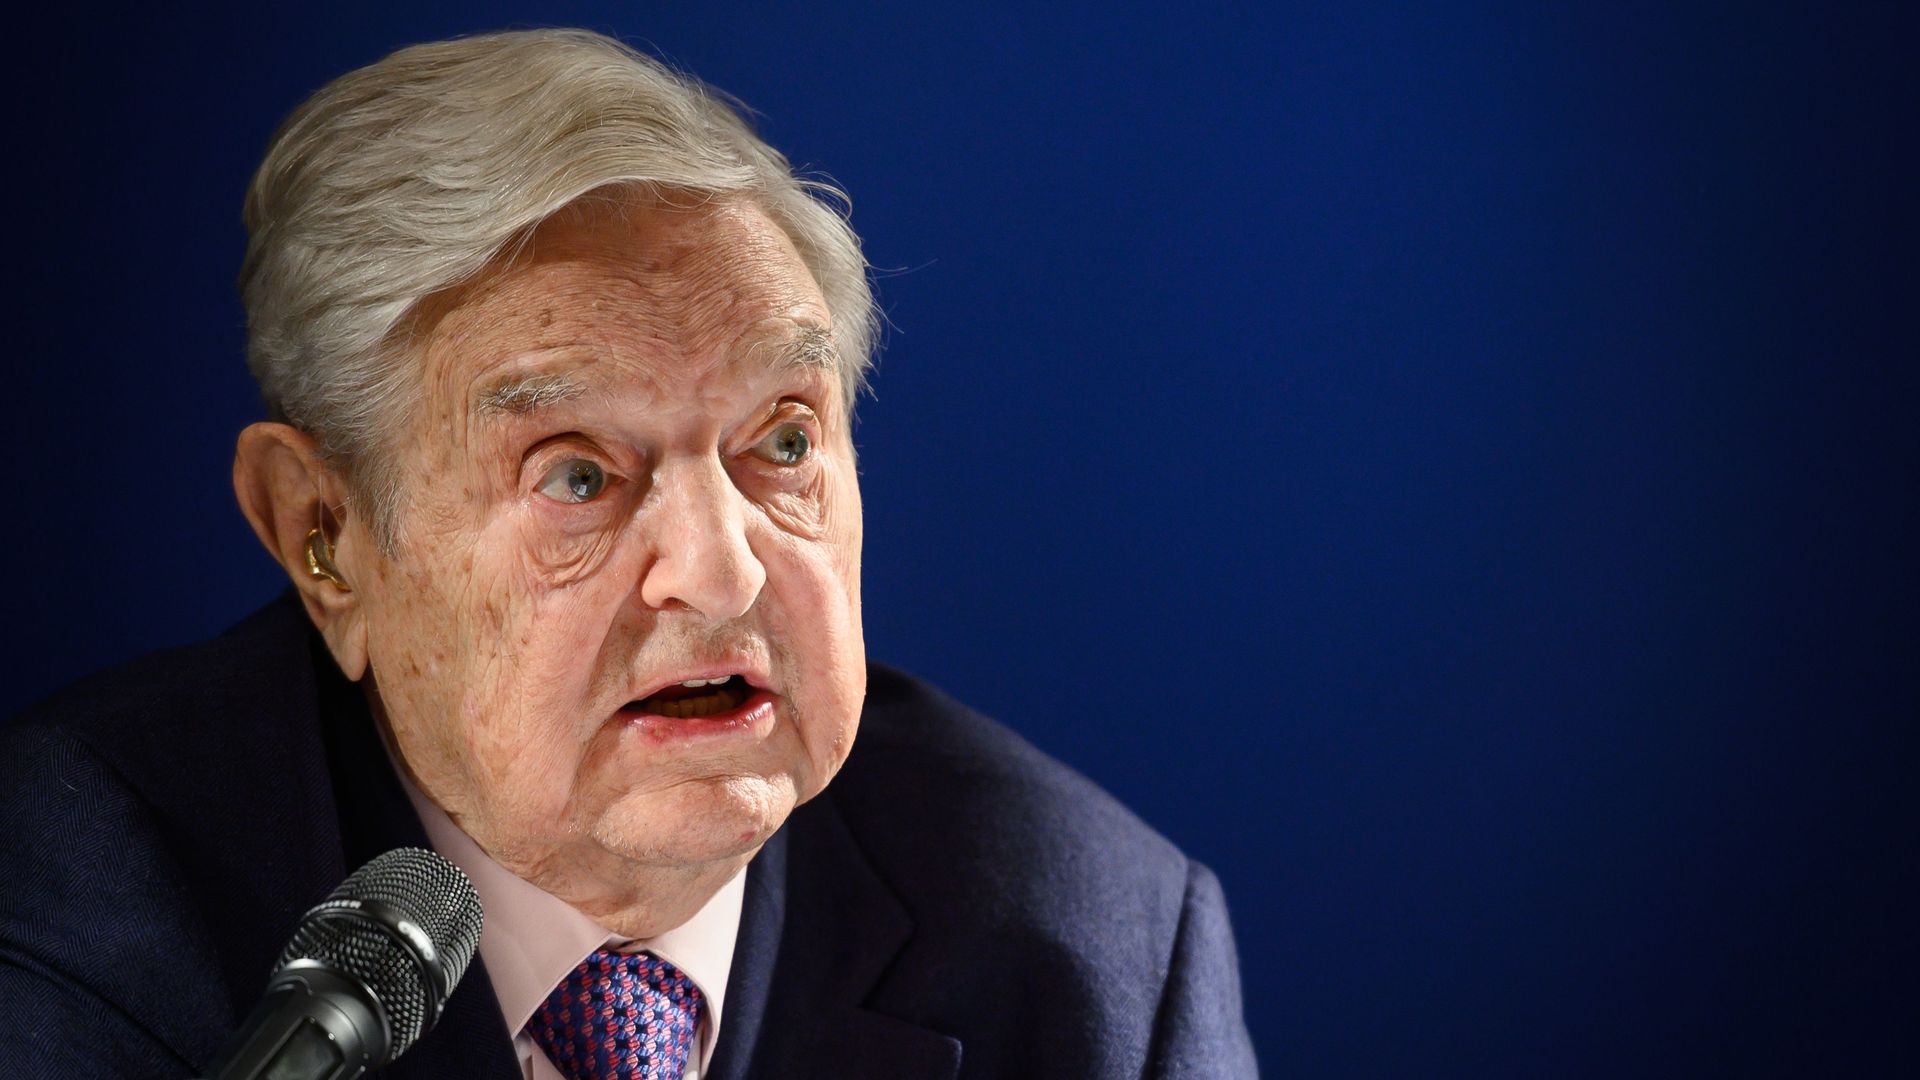 US investor and philanthropist George Soros speaks into a microphone.